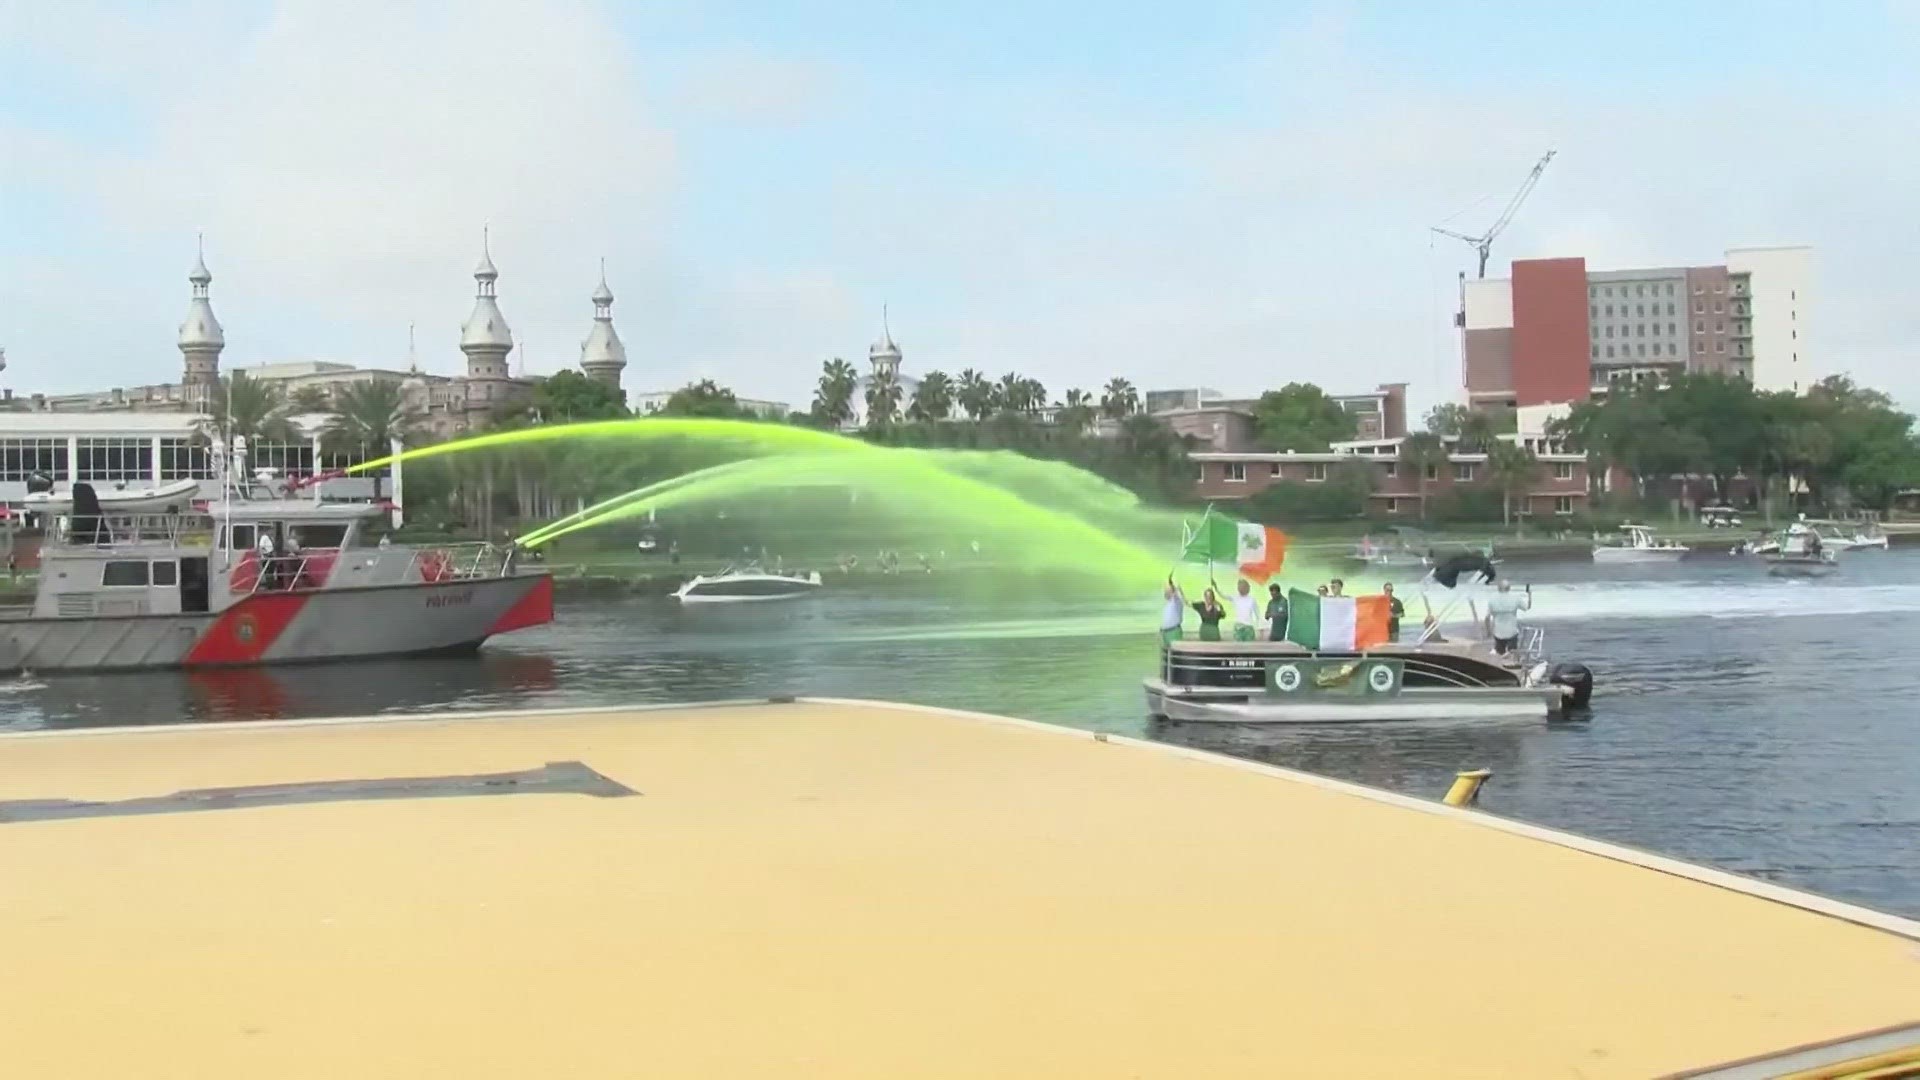 In Tampa, celebrations kicked off Saturday with an Irish-American tradition of dyeing the Hillsborough River green for the annual River O'Green Fest.